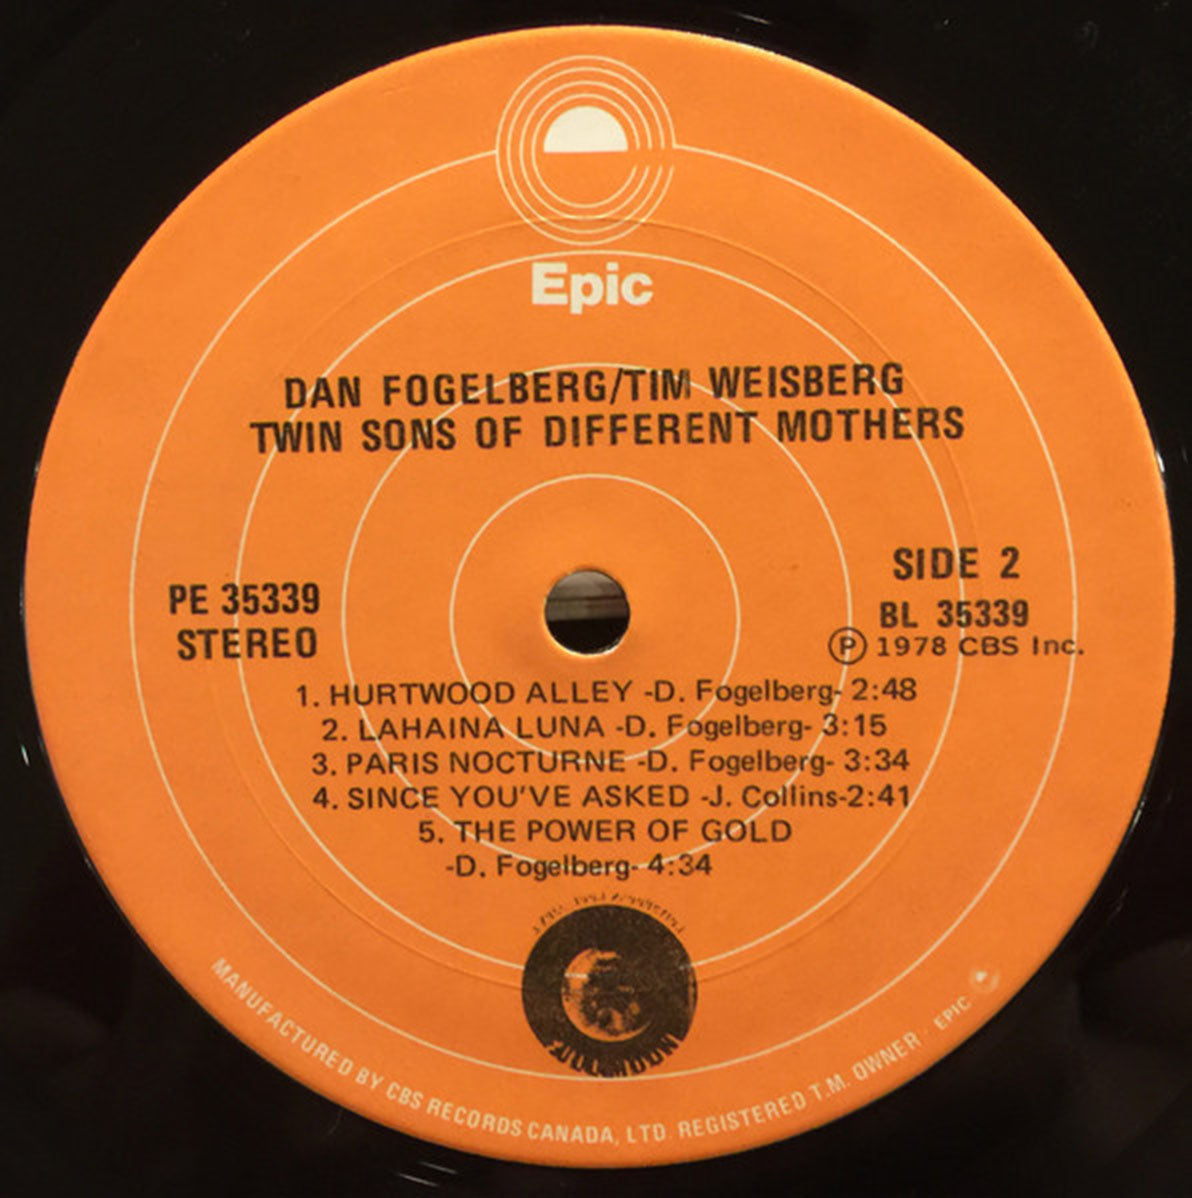 Dan Fogelberg & Tim Weisberg – Twin Sons Of Different Mothers - 1978